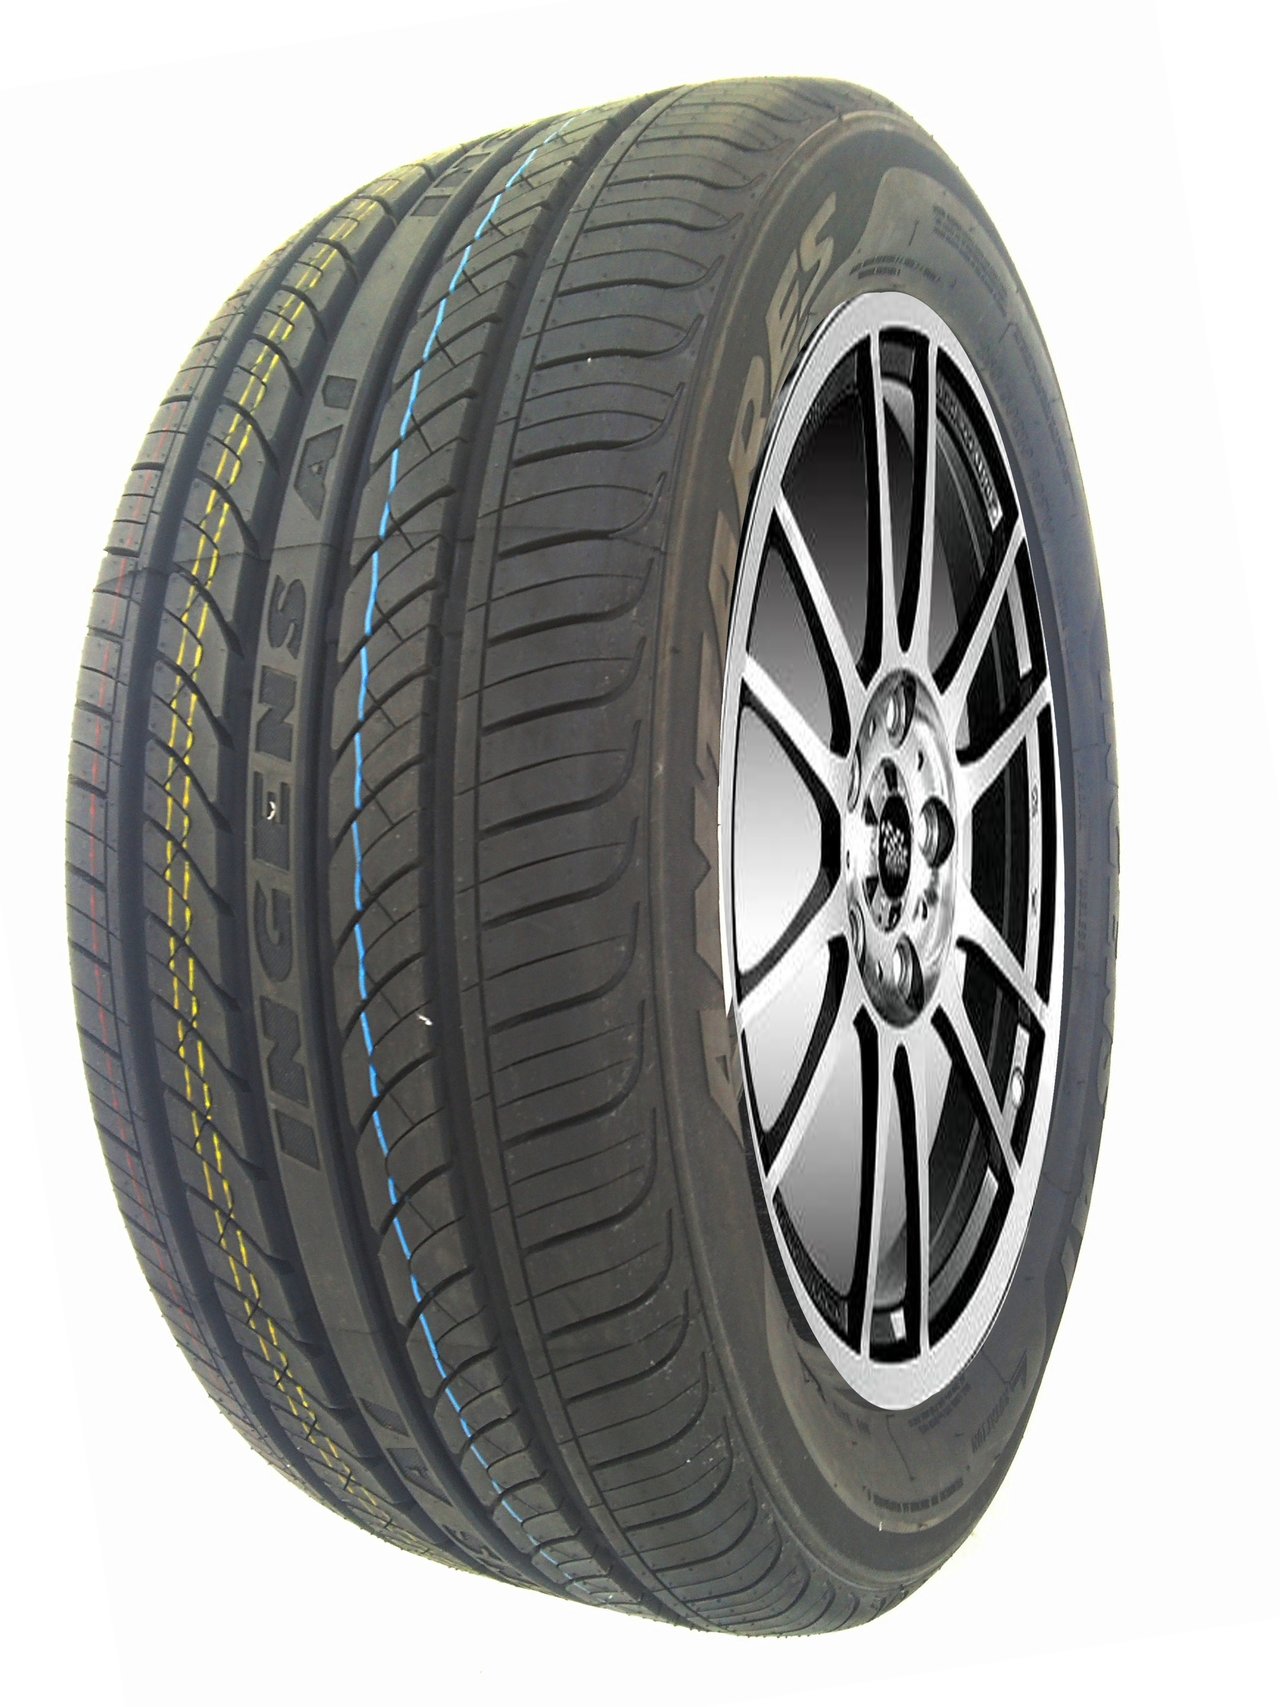 Antares Ingens A1 185/70R14 88T TL M+S